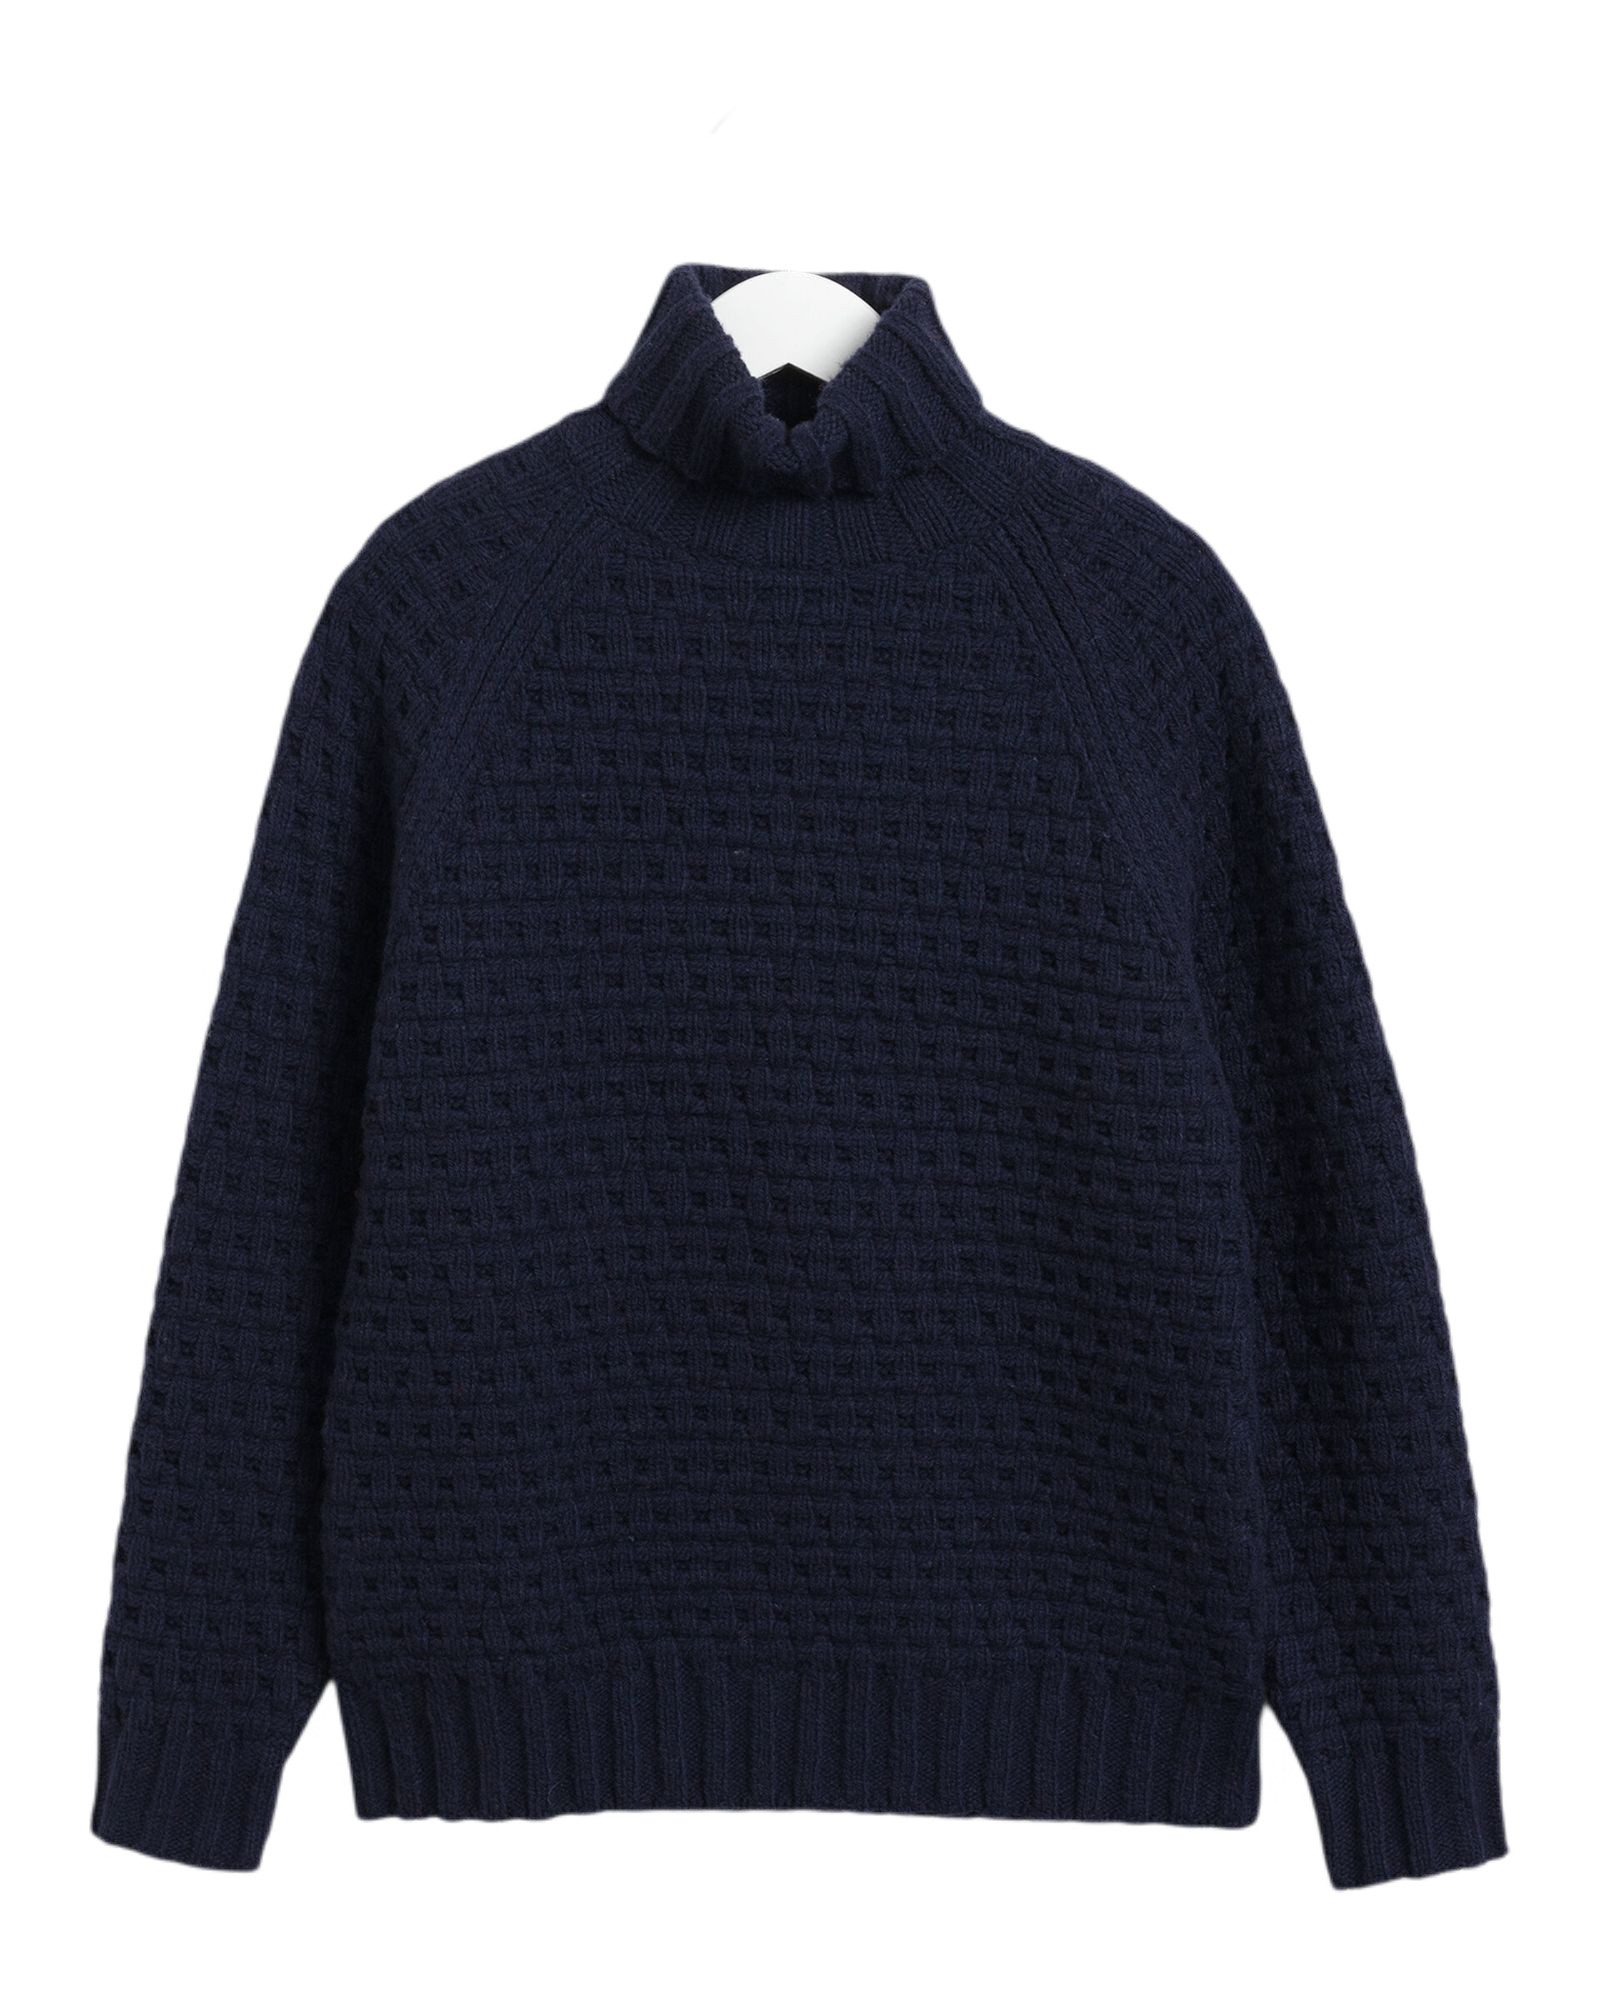 GANT 8070011-433 Chunky Texture Turtle Neck Pullover BLU NAVY